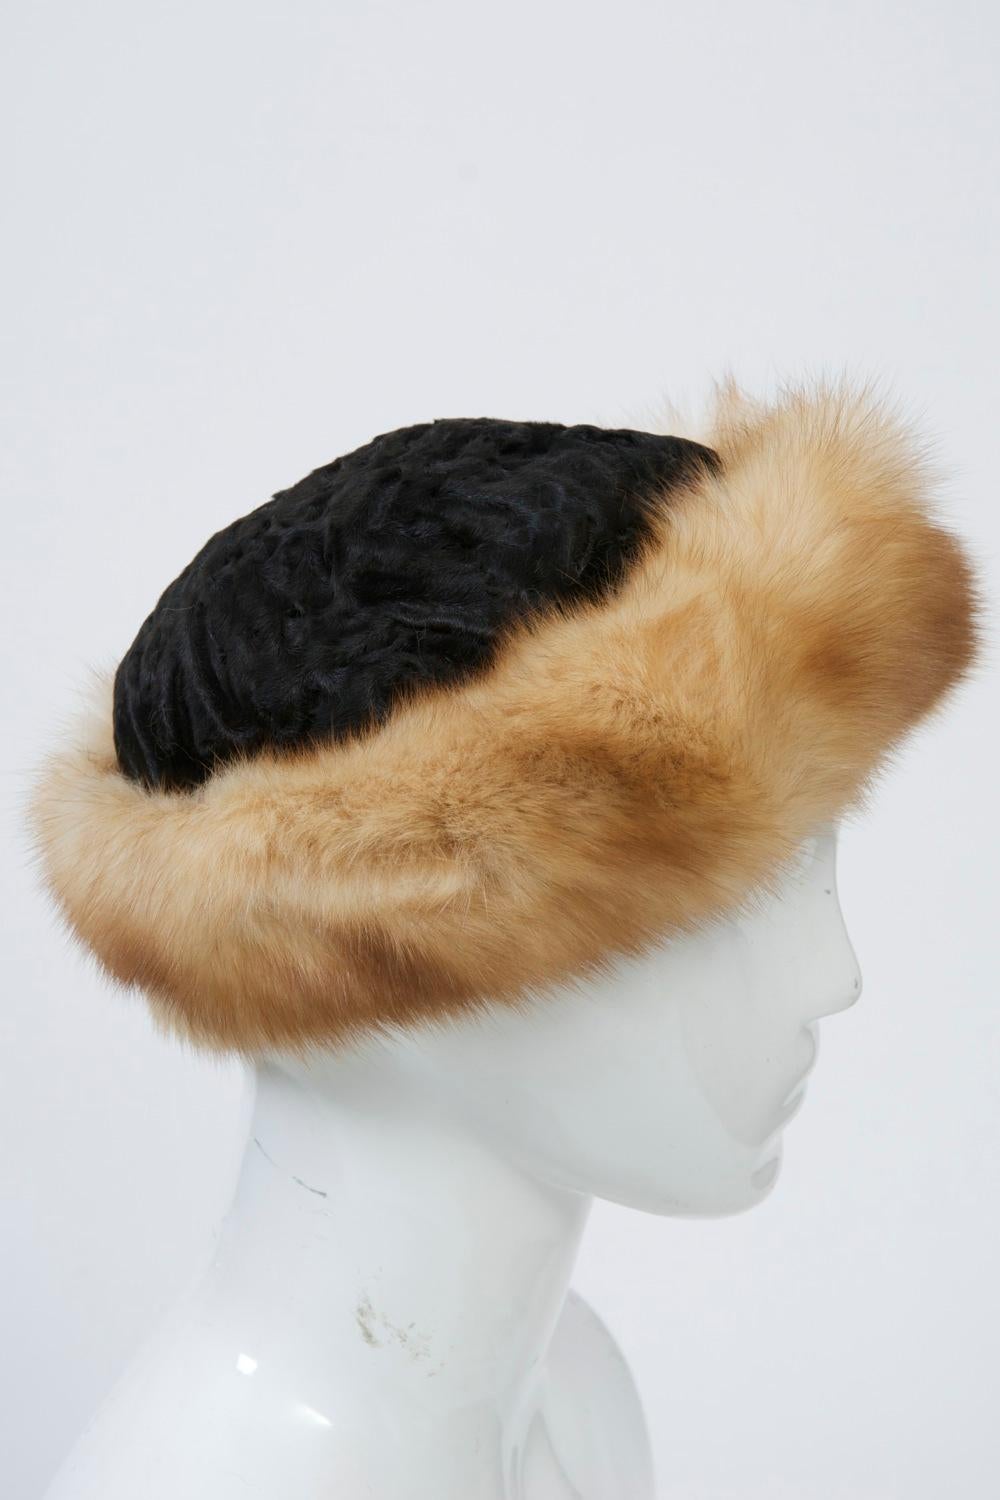 Black broadtail hat in cap style featuring a deep border of sable in light reddish brown - two luxury furs in one by noted furrier Birger Christensen of Denmark. Size S.